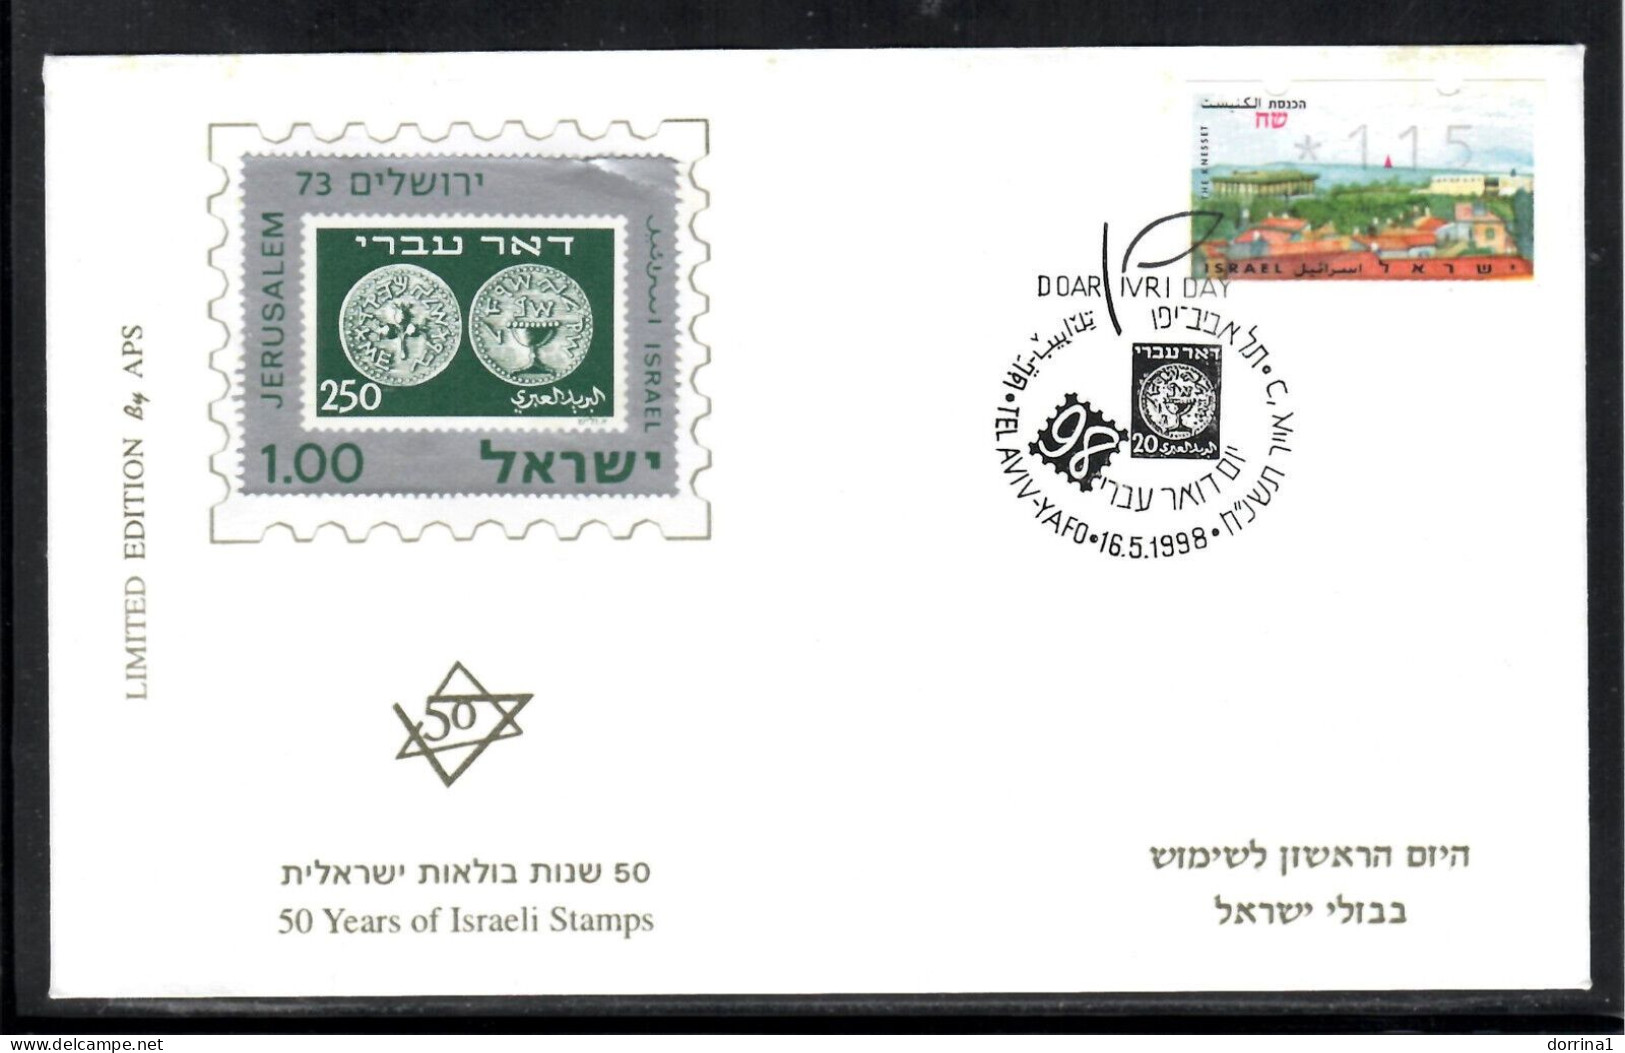 Doar Ivri Day May 16 1998 Cover Israel Limited Edition 300 Covers Only No. 0106 - Covers & Documents